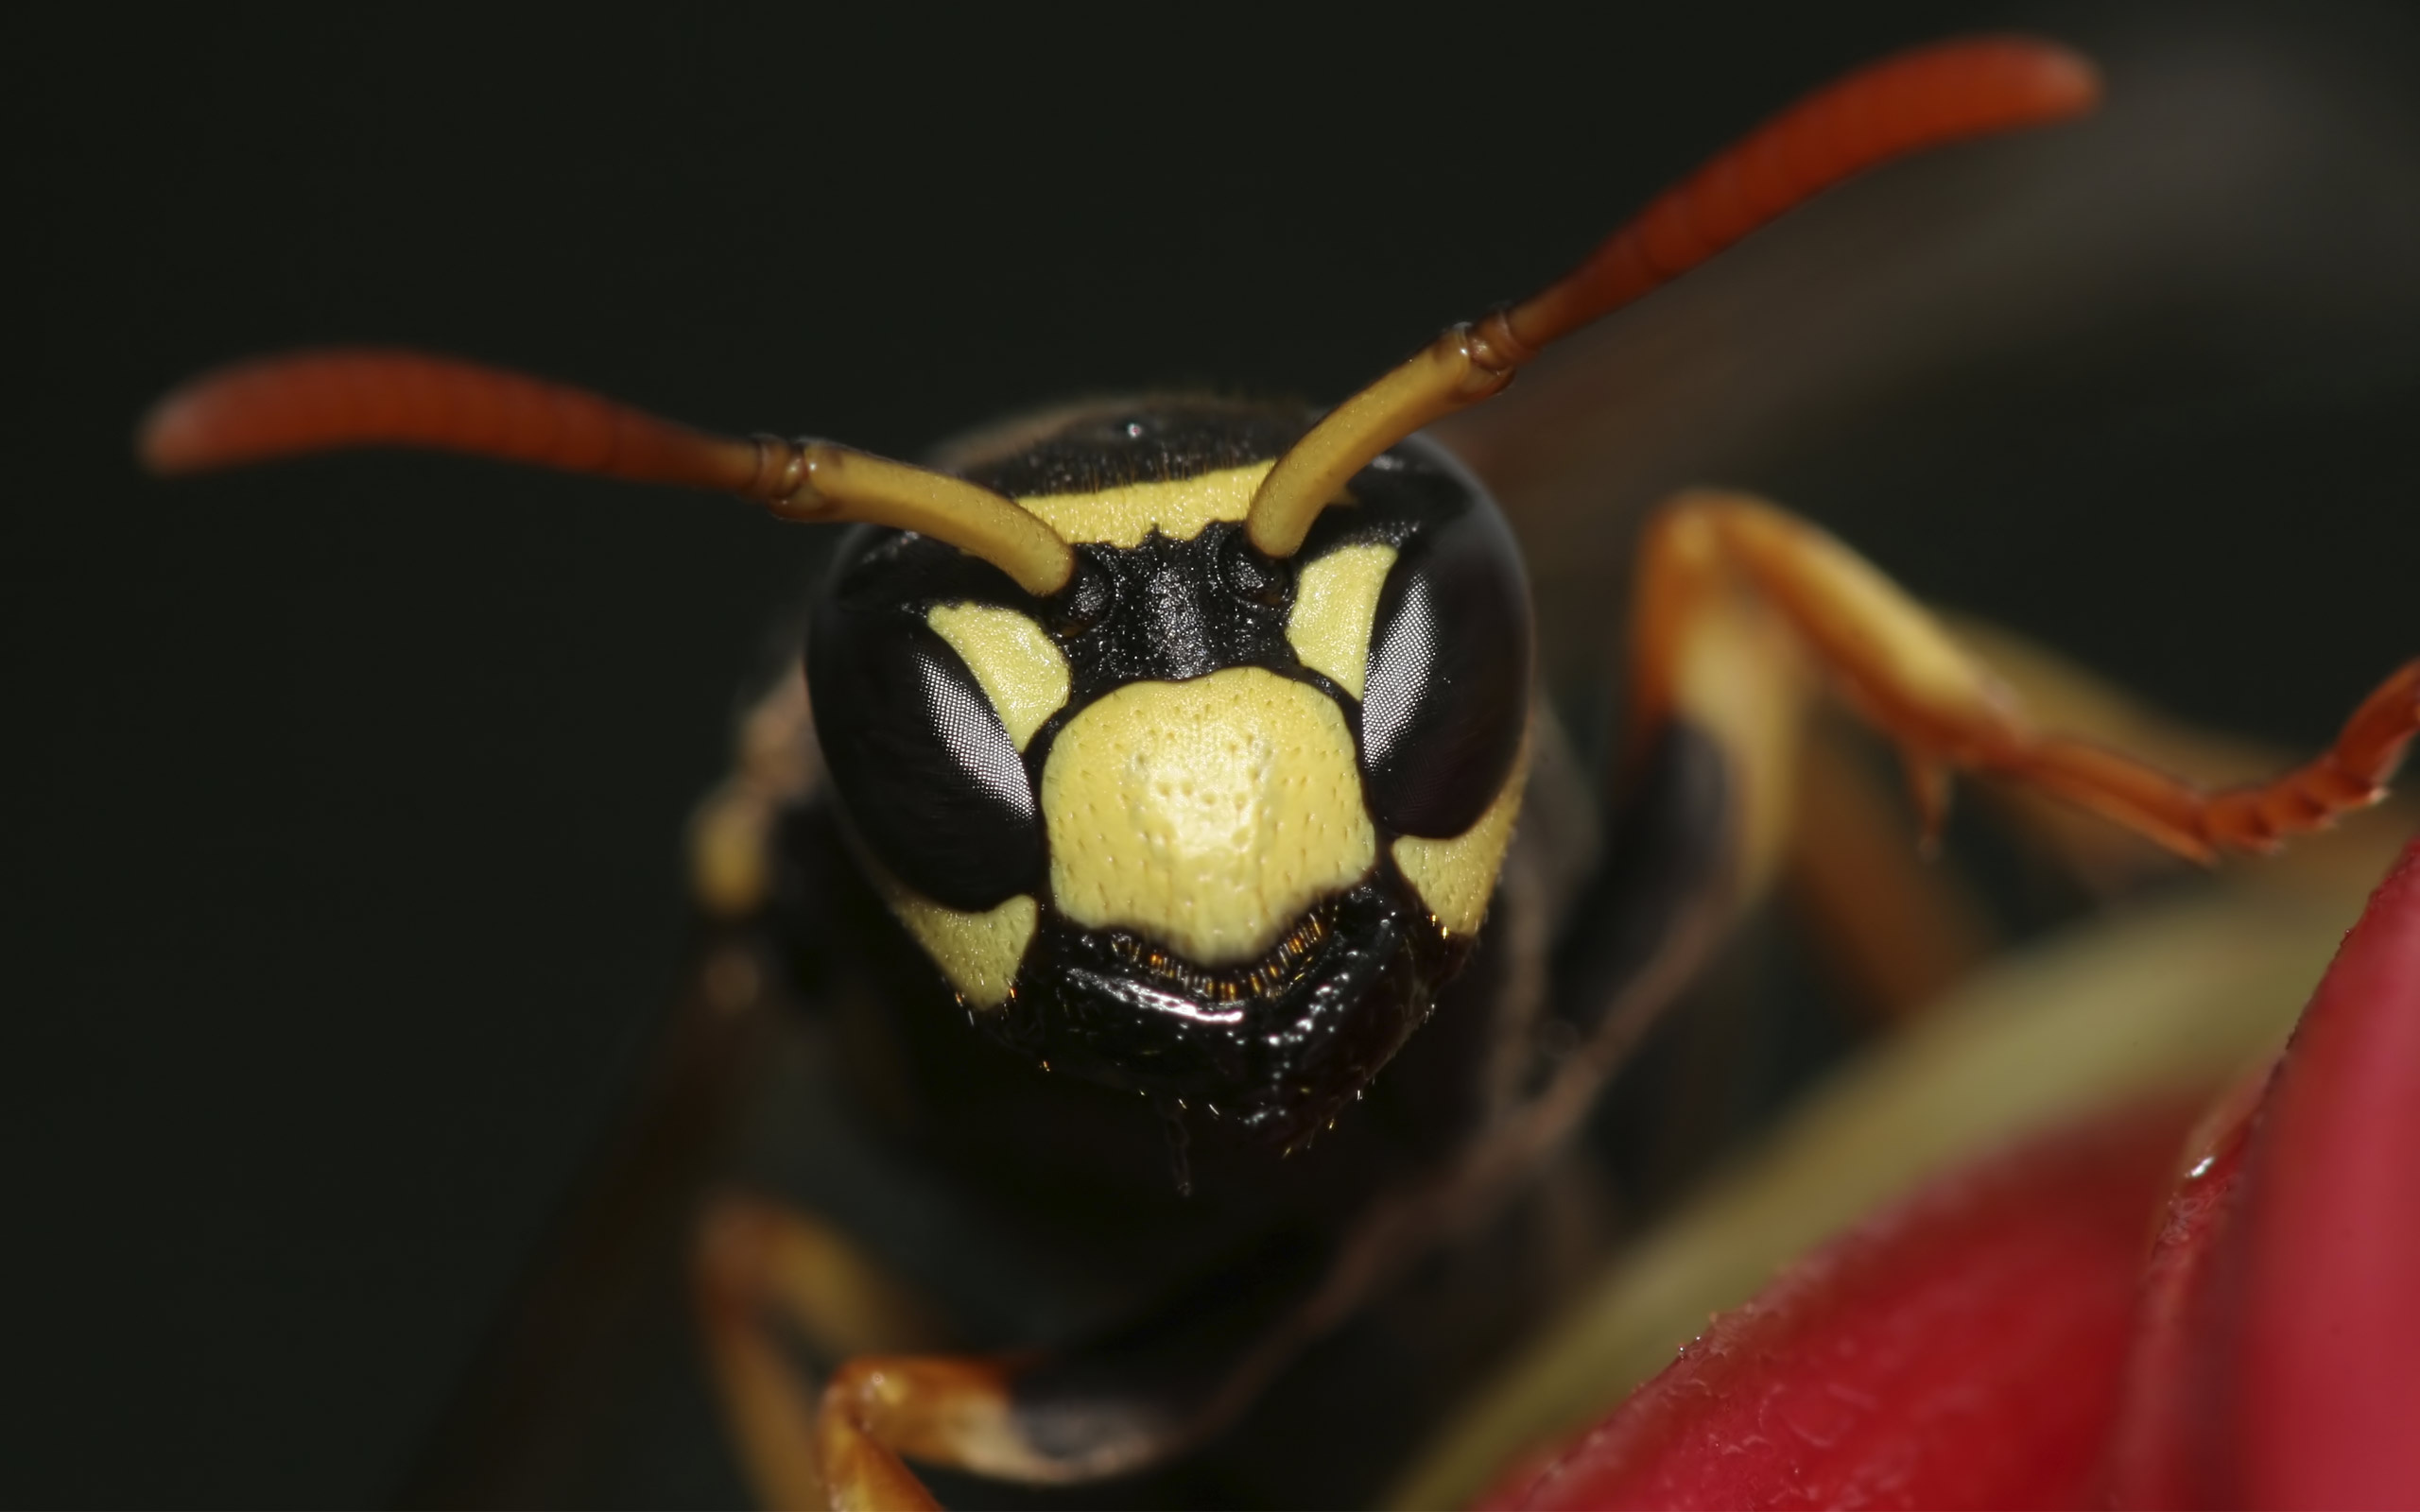 Wasp wallpapers, Insect beauty, Nature's tiny warriors, 4K resolution, 2560x1600 HD Desktop